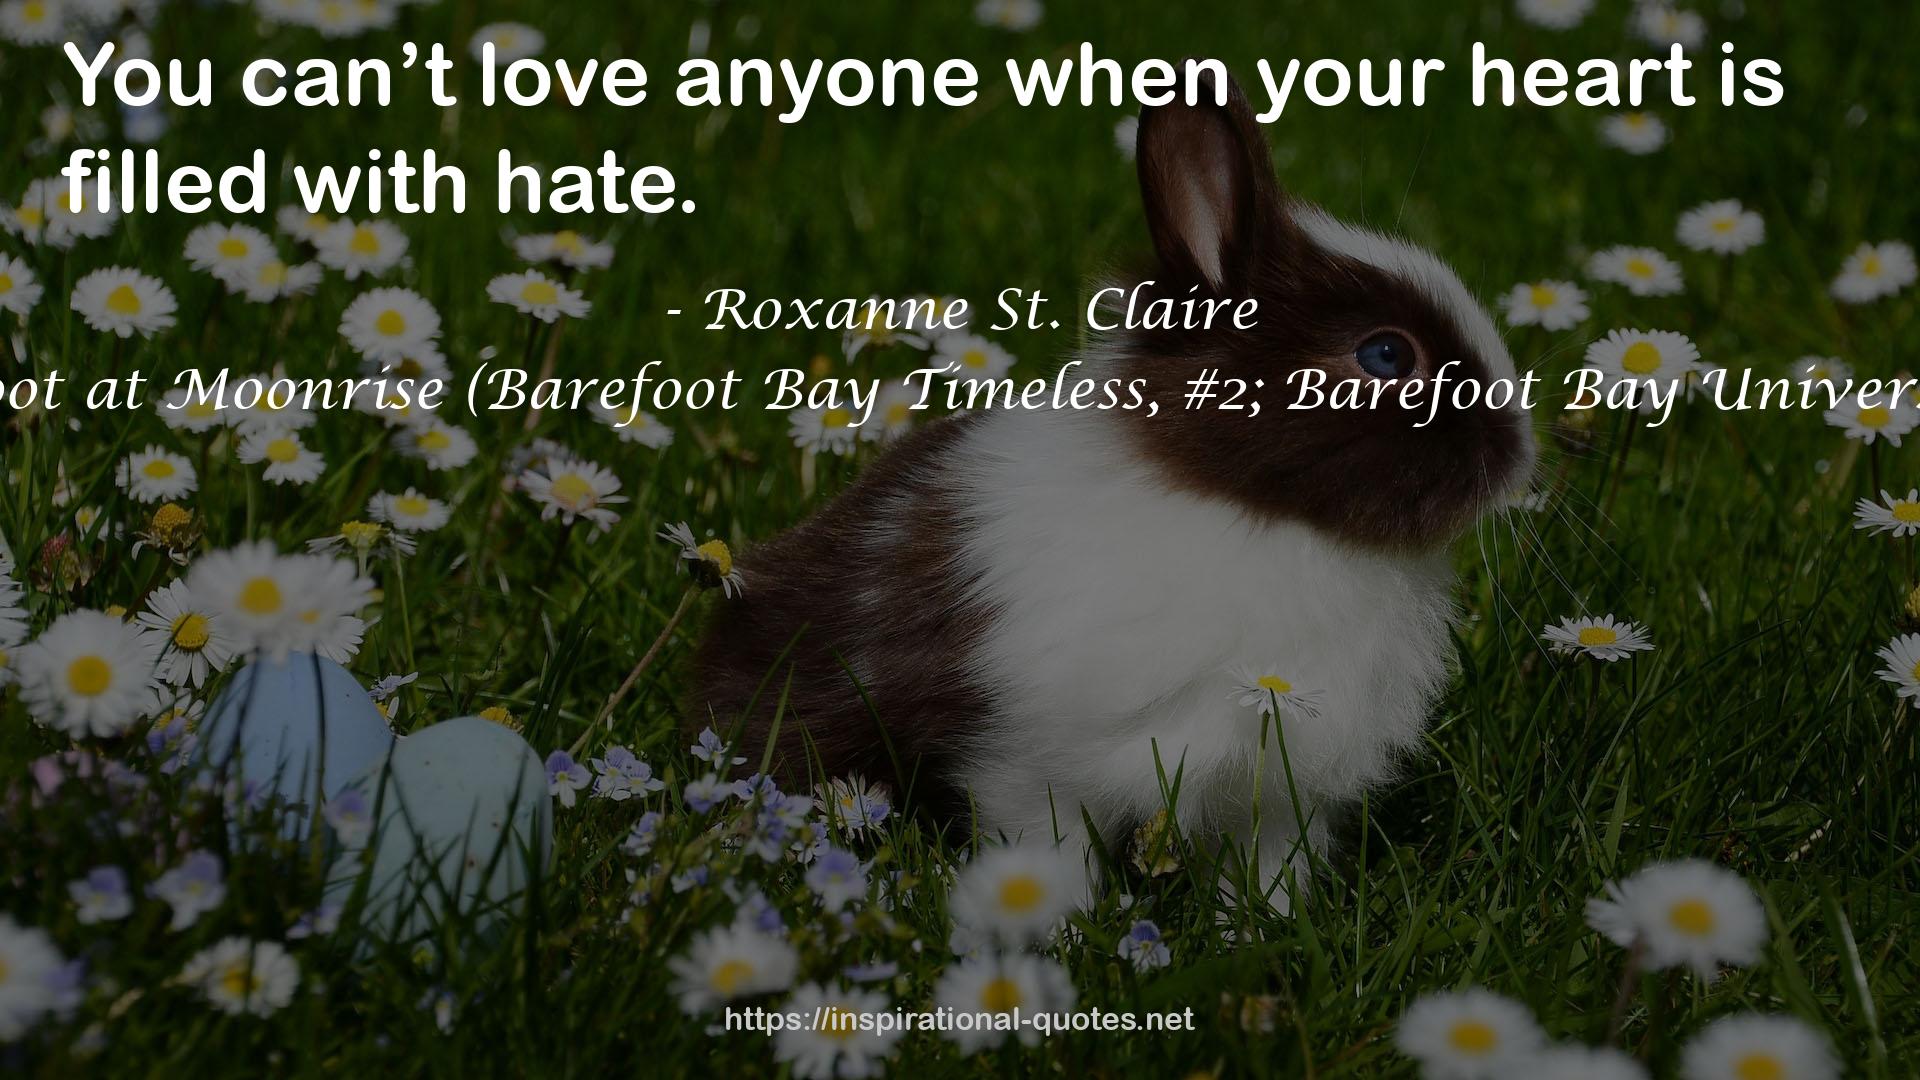 Barefoot at Moonrise (Barefoot Bay Timeless, #2; Barefoot Bay Universe, #17) QUOTES